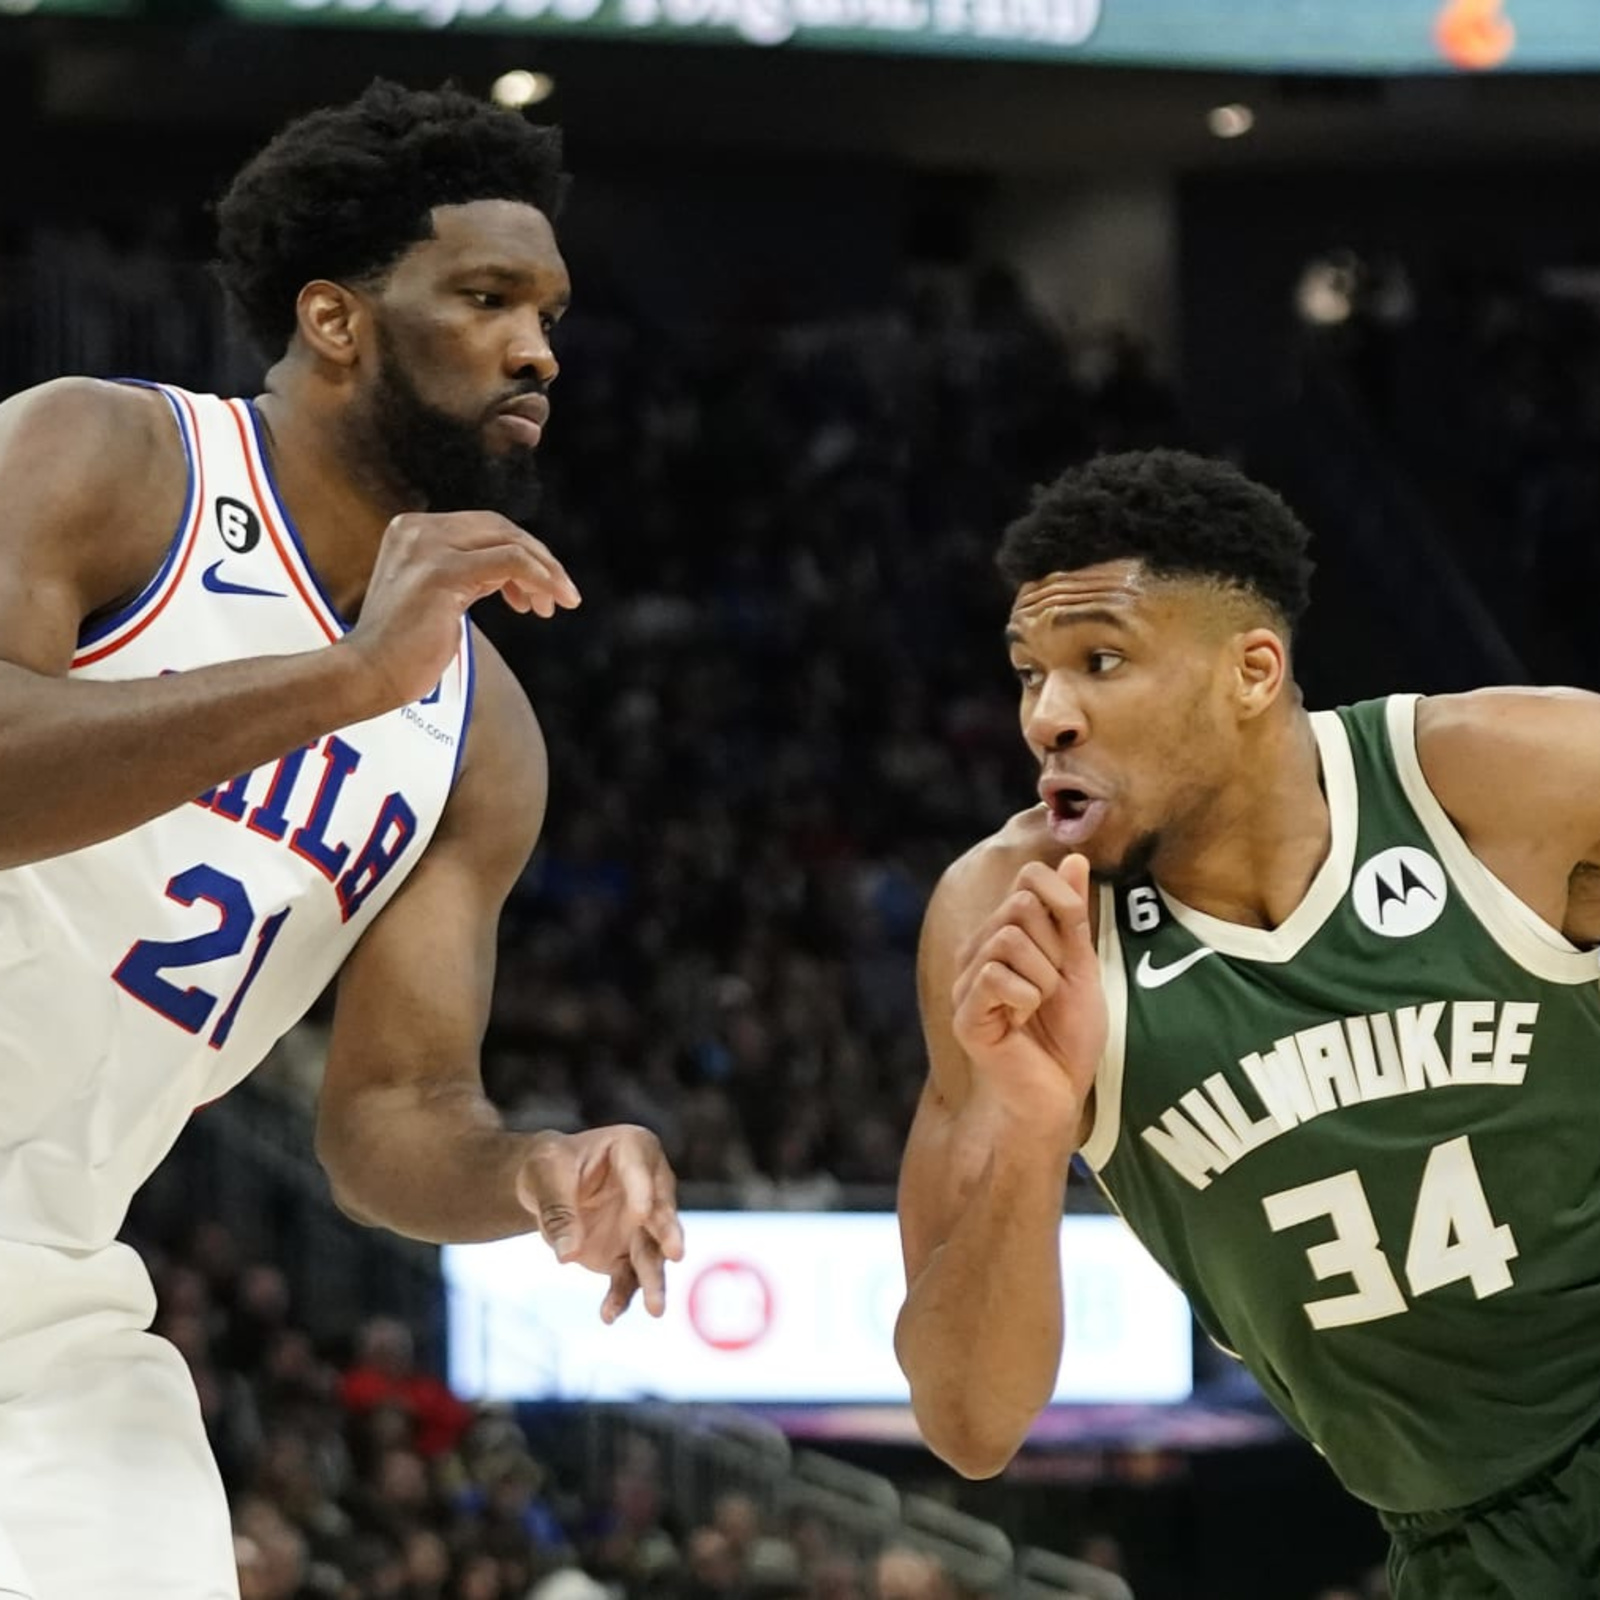 Joel Embiid Posted a Cryptic Instagram Story After Playoff Loss